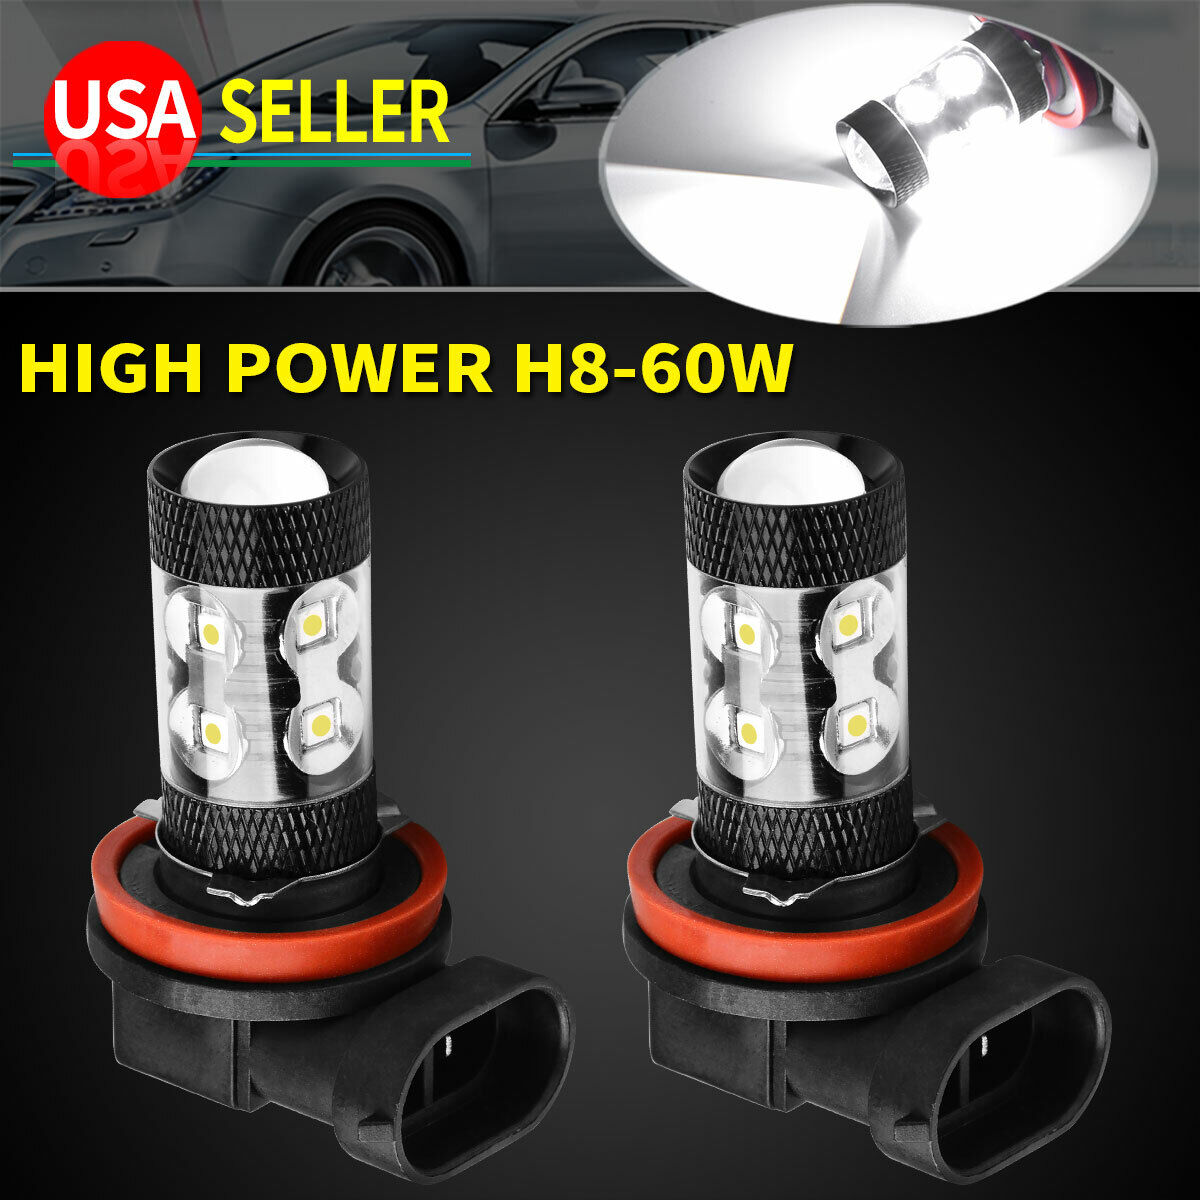 2pc Super White H8 High Power 60W LED Fog driving Light Bulbs Replacement